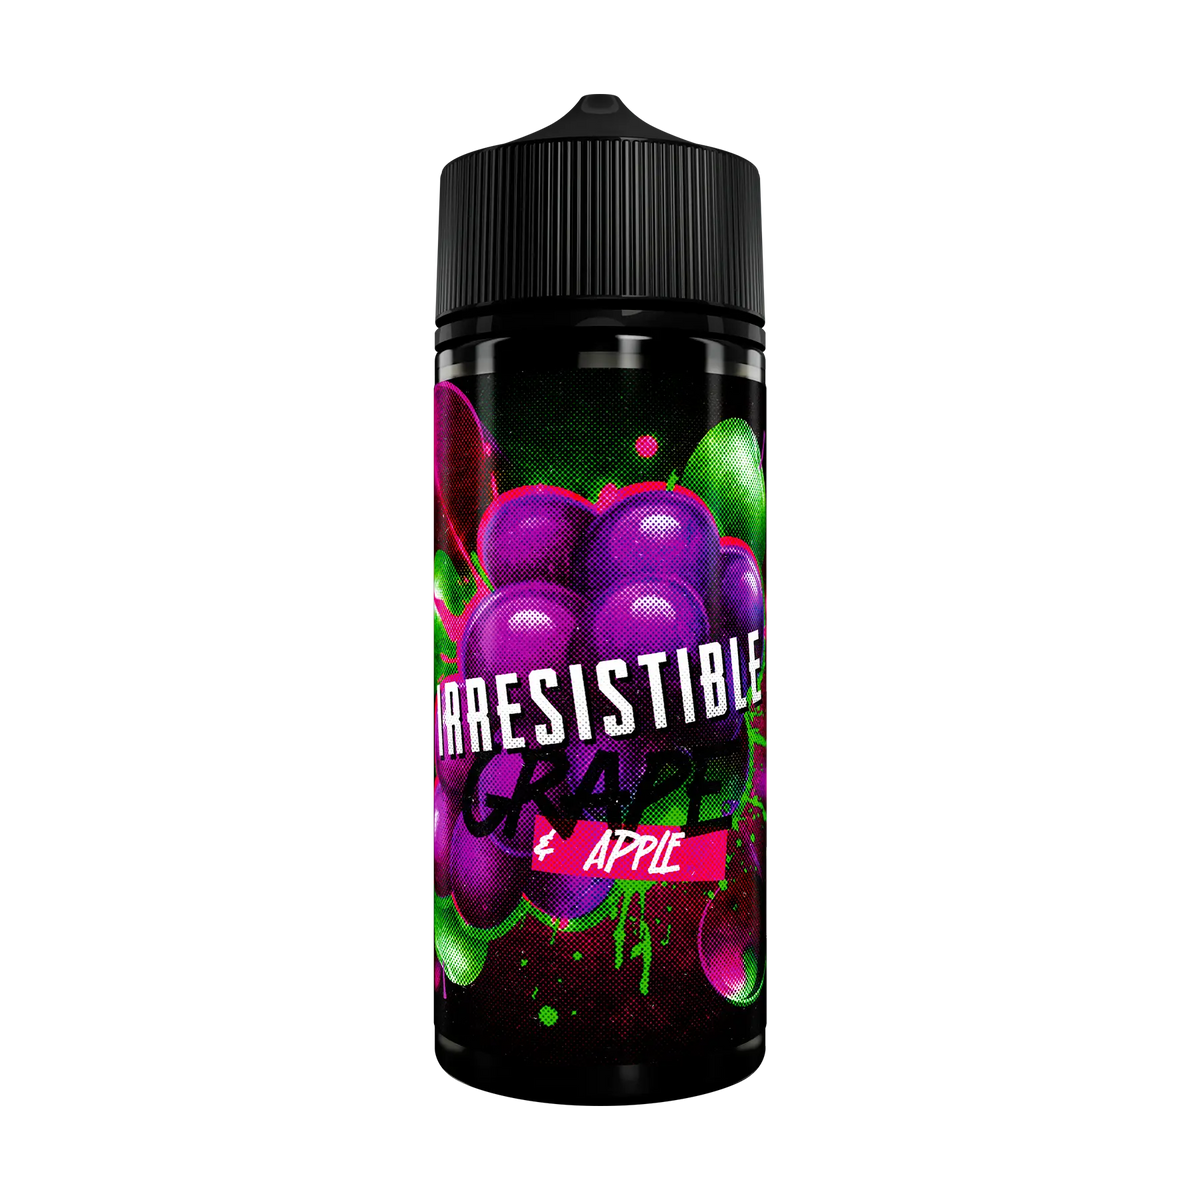 Irresistible Grape Apple is a blend of crisp tart apples & sweet juicy grapes. The apples are balanced perfectly by the grapes, creating a satisfying vape.